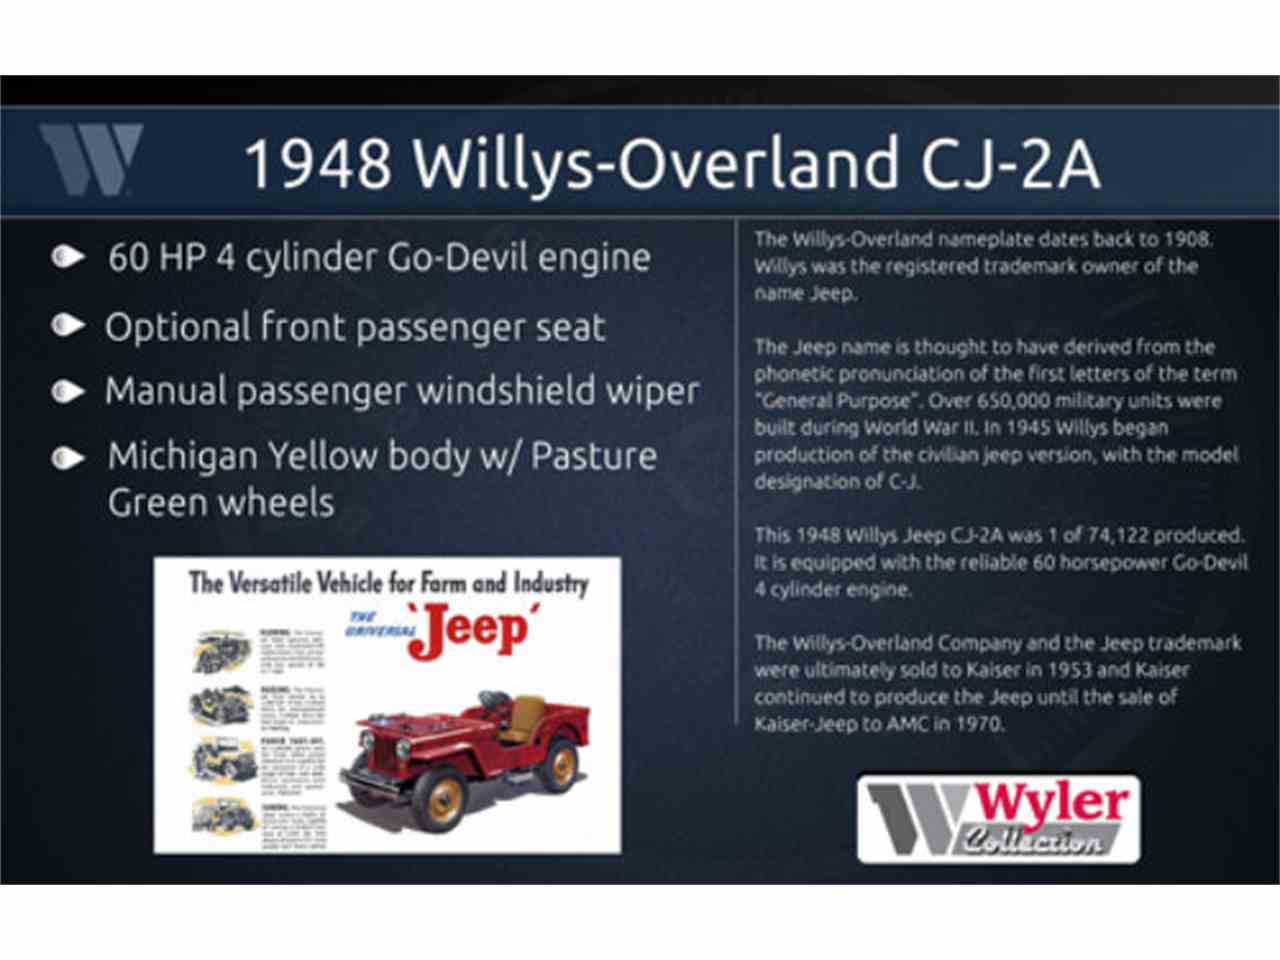 Where can you sell a 1948 Willys Jeep?